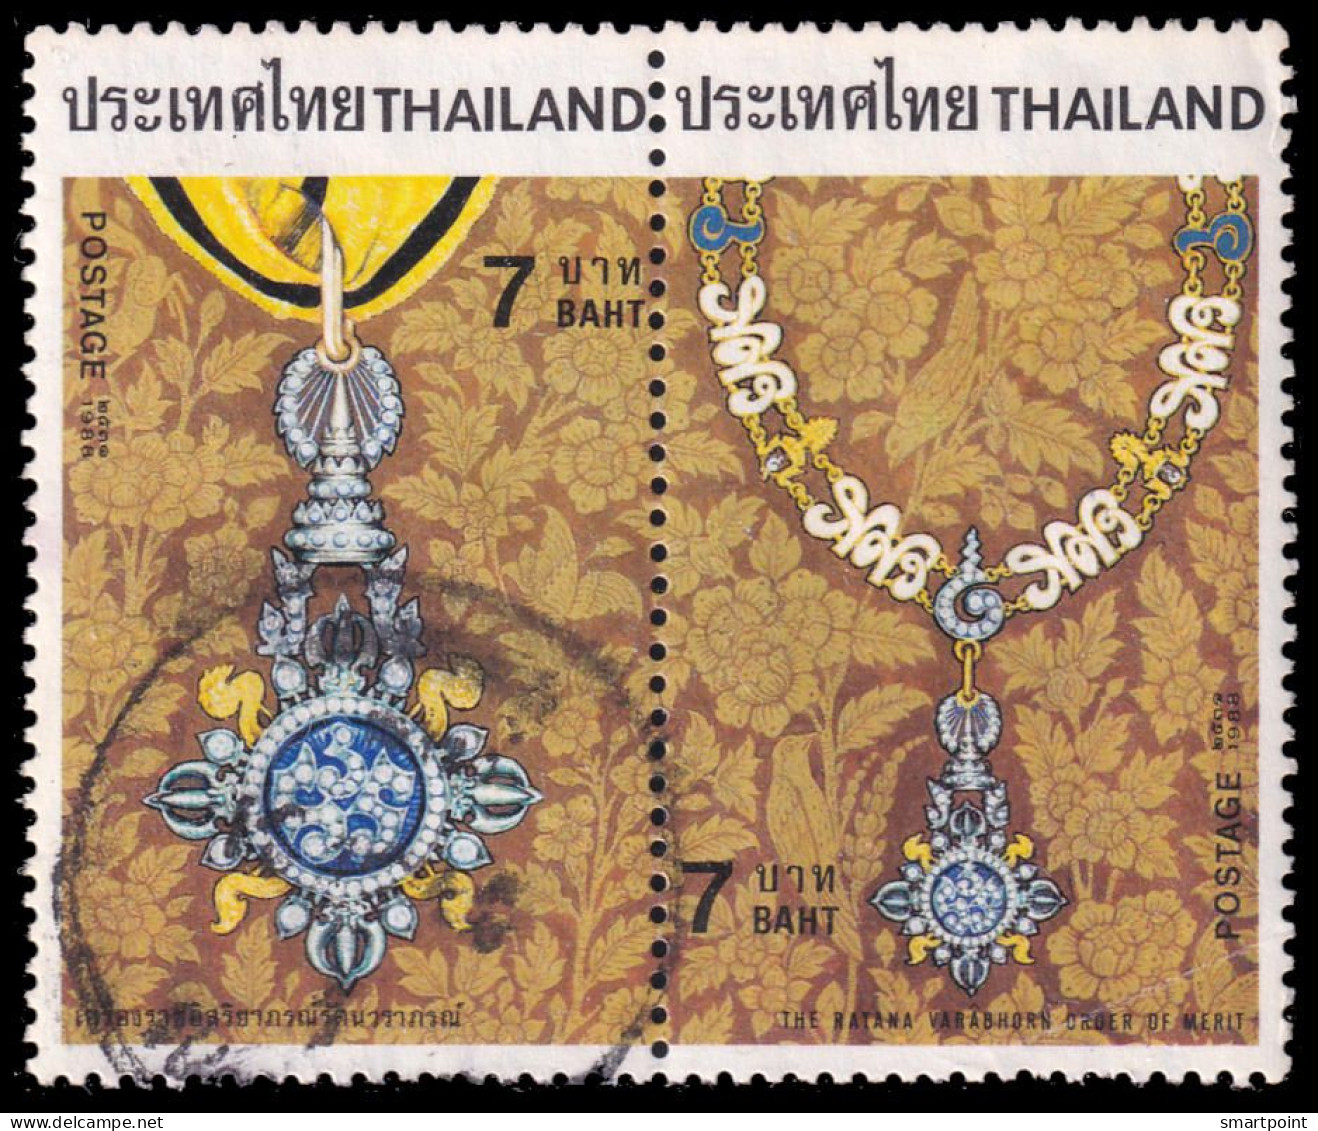 Thailand Stamp 1988 Royal Decorations (2nd Series) 7 Baht In Pair - Used - Thaïlande